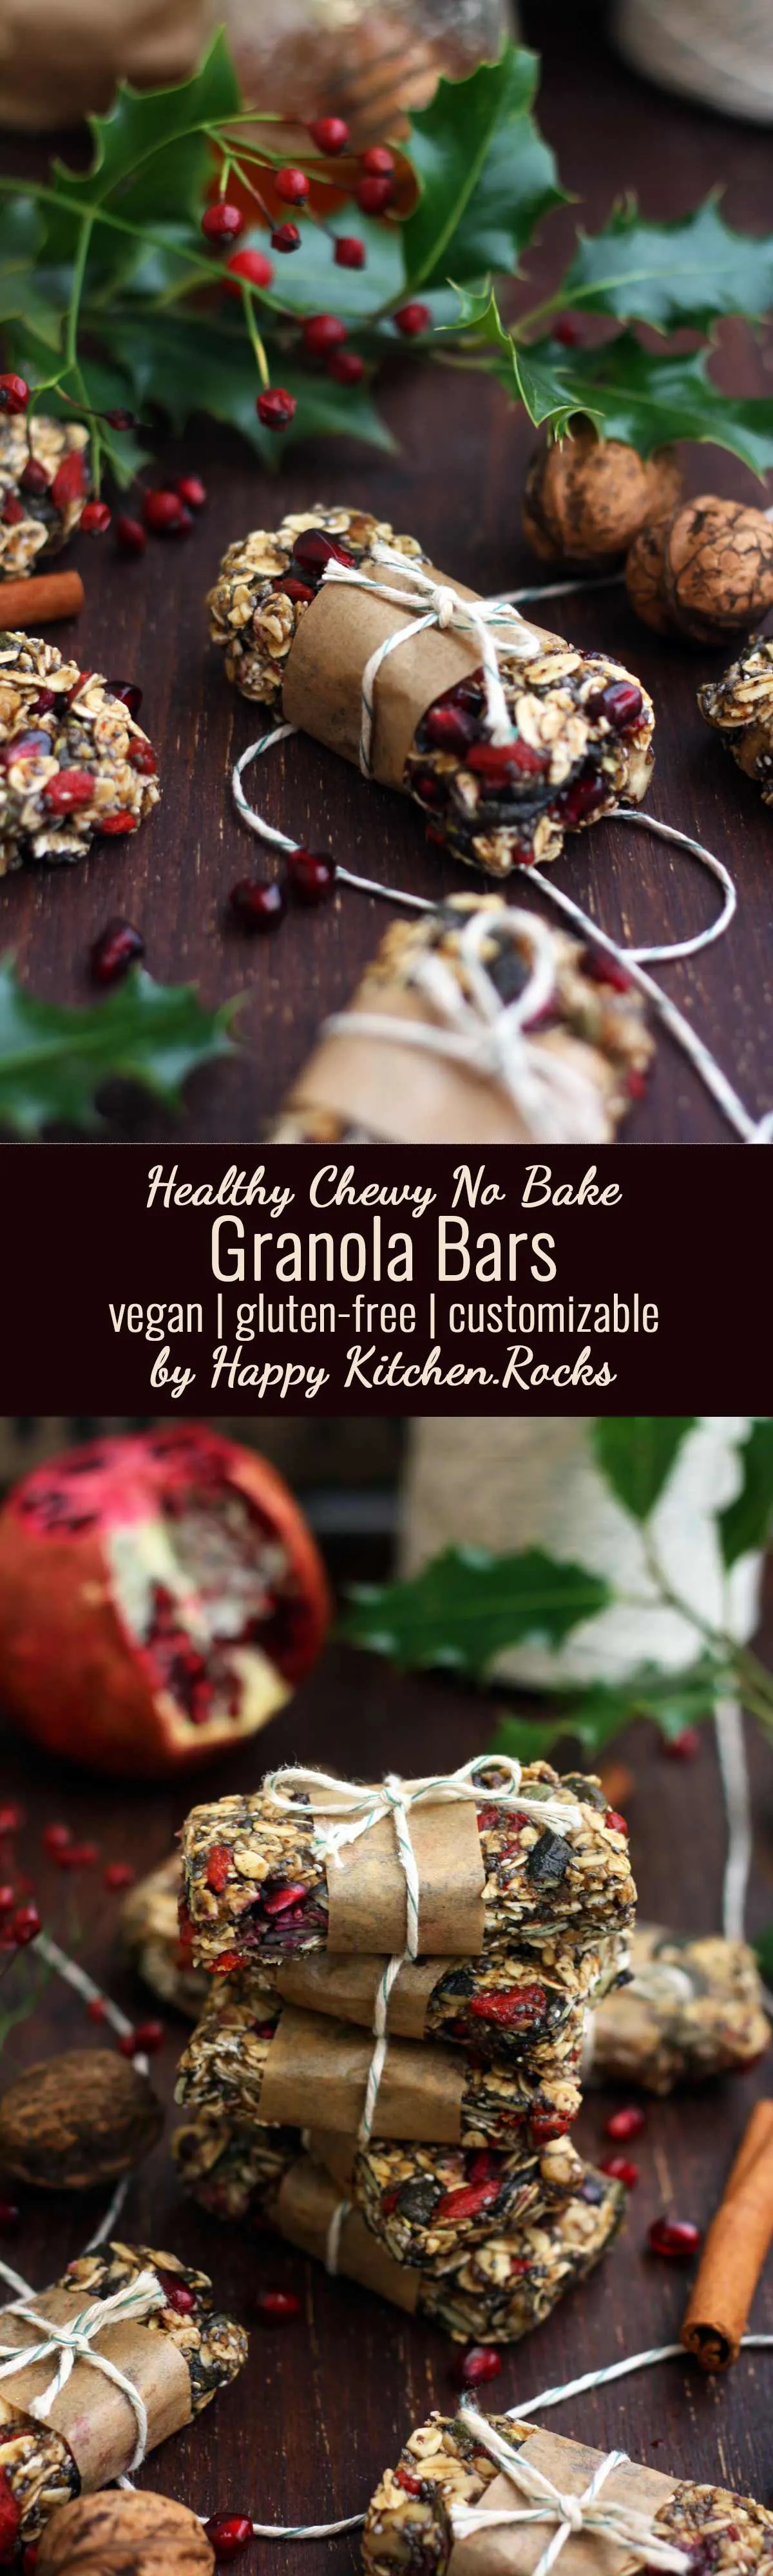 Healthy Chewy No Bake Granola Bars - Super Long Collage with Two Images and Text Overlay